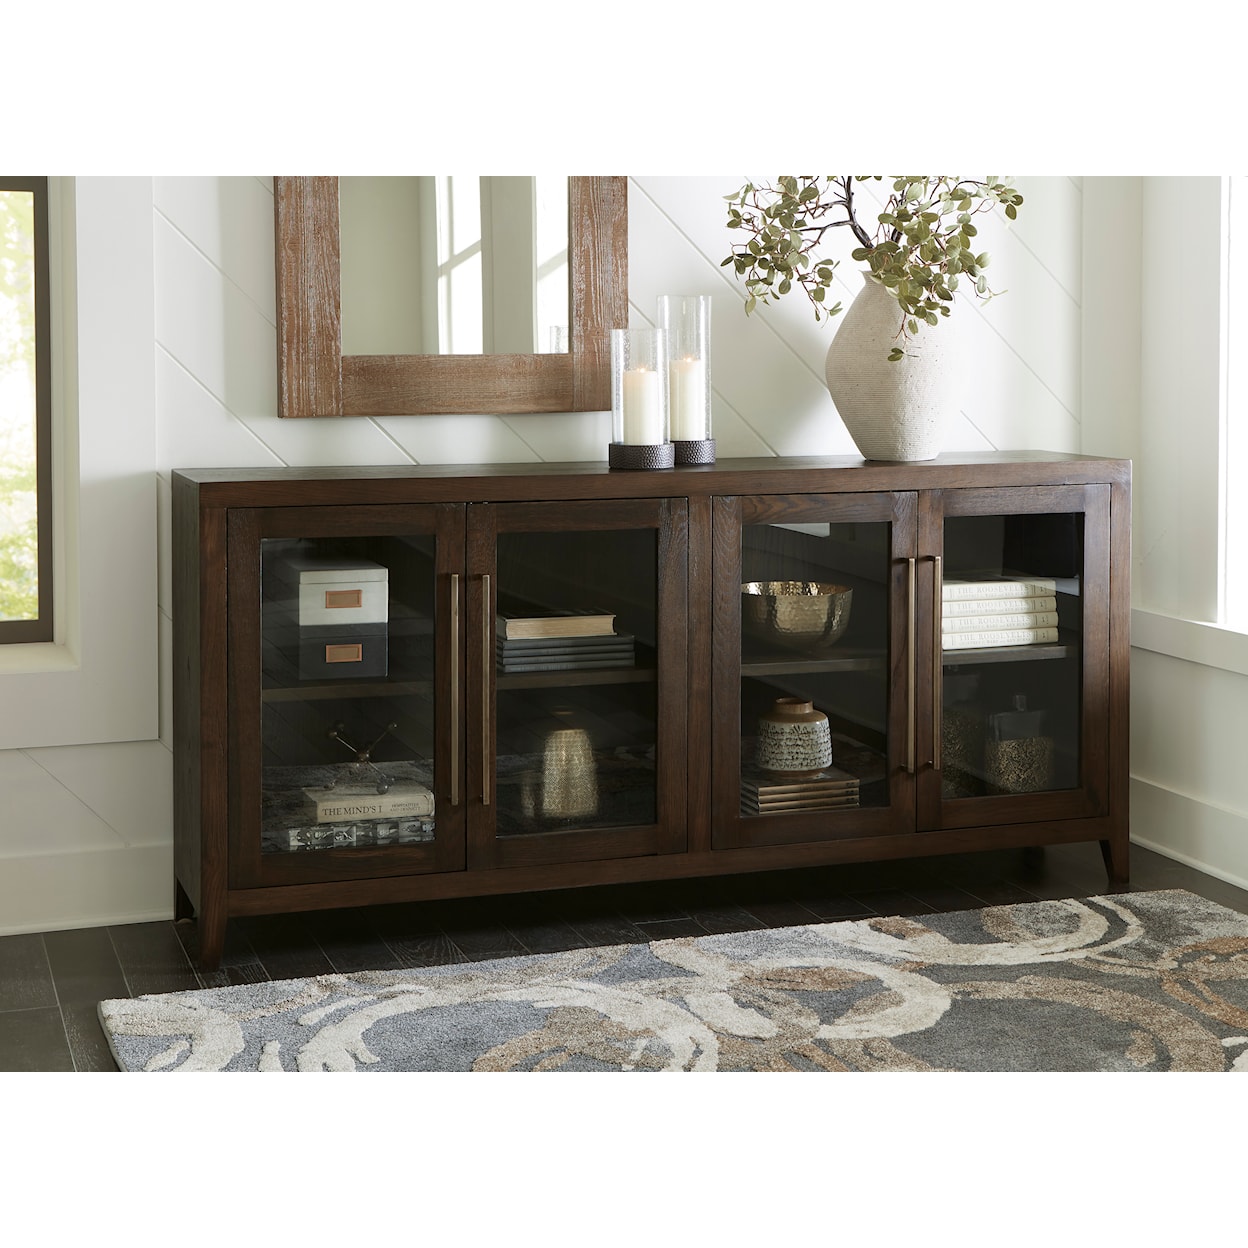 Benchcraft Balintmore Accent Cabinet